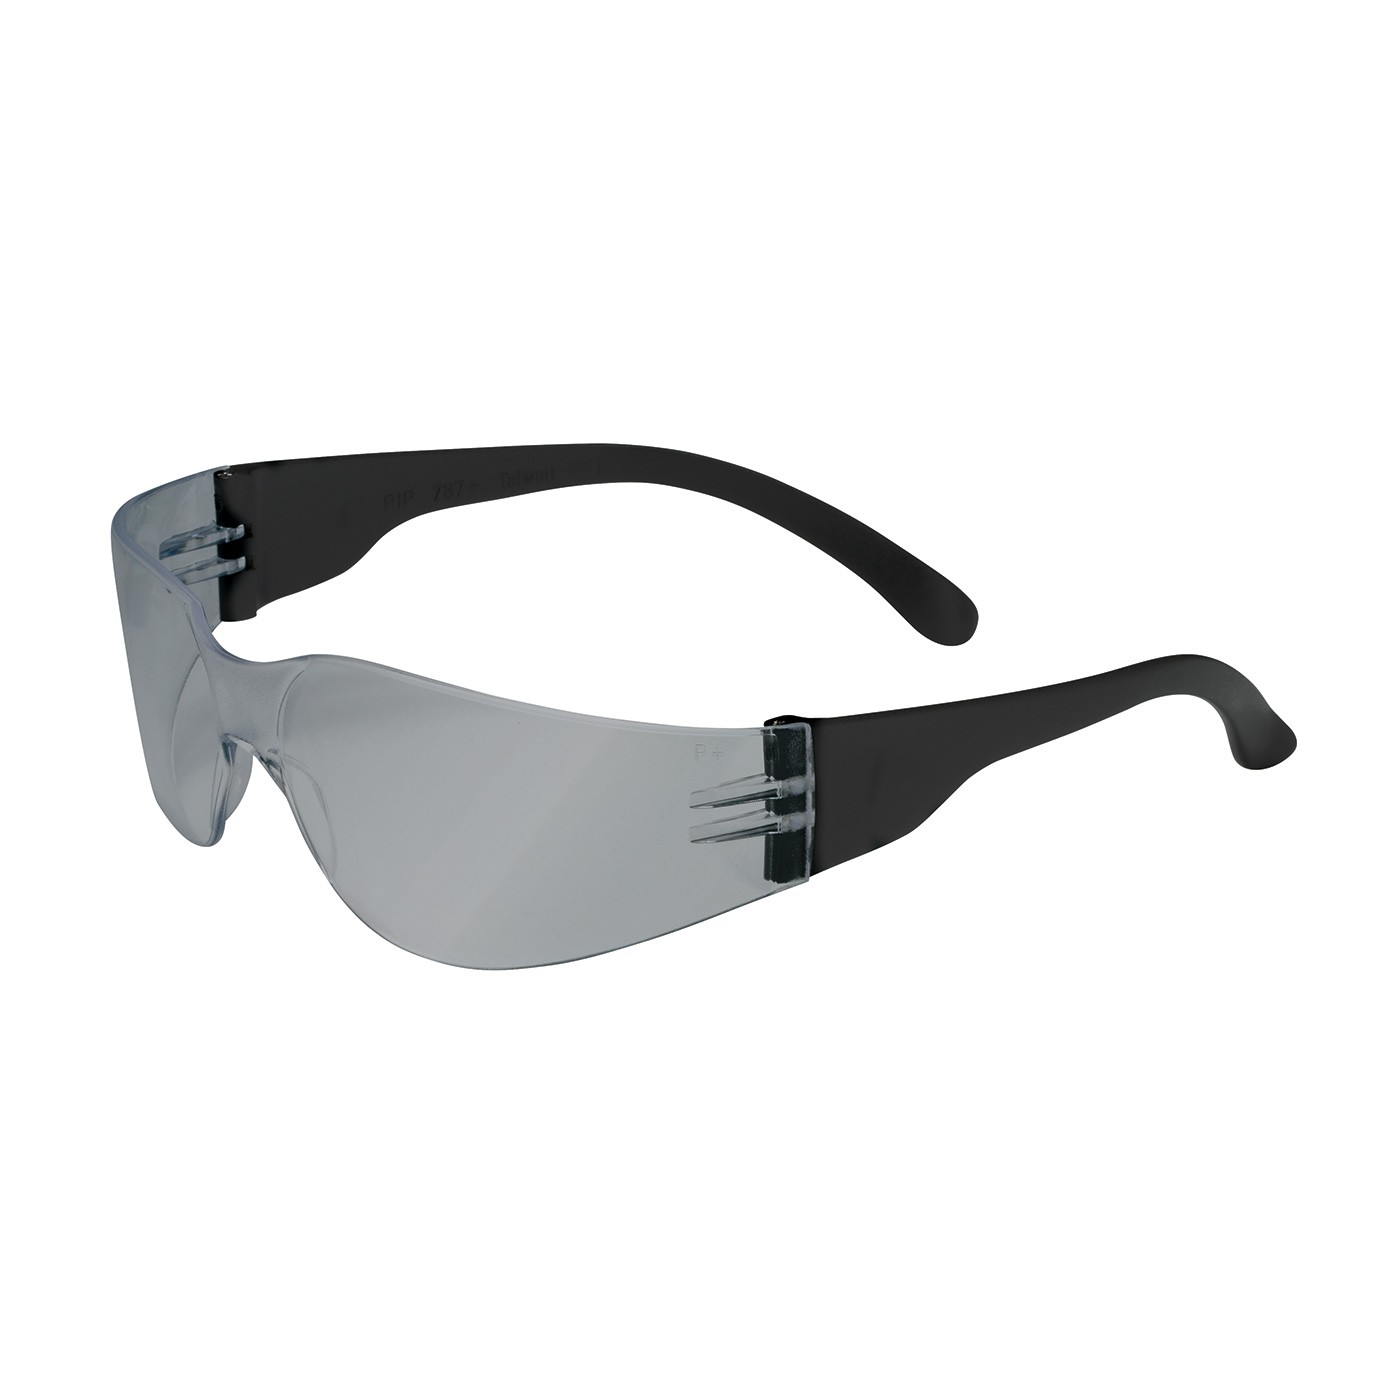  Zenon Z12™ Rimless Safety Glasses with Black Temple, Silver Mirror Lens and Anti-Scratch Coating  (#250-01-0005)